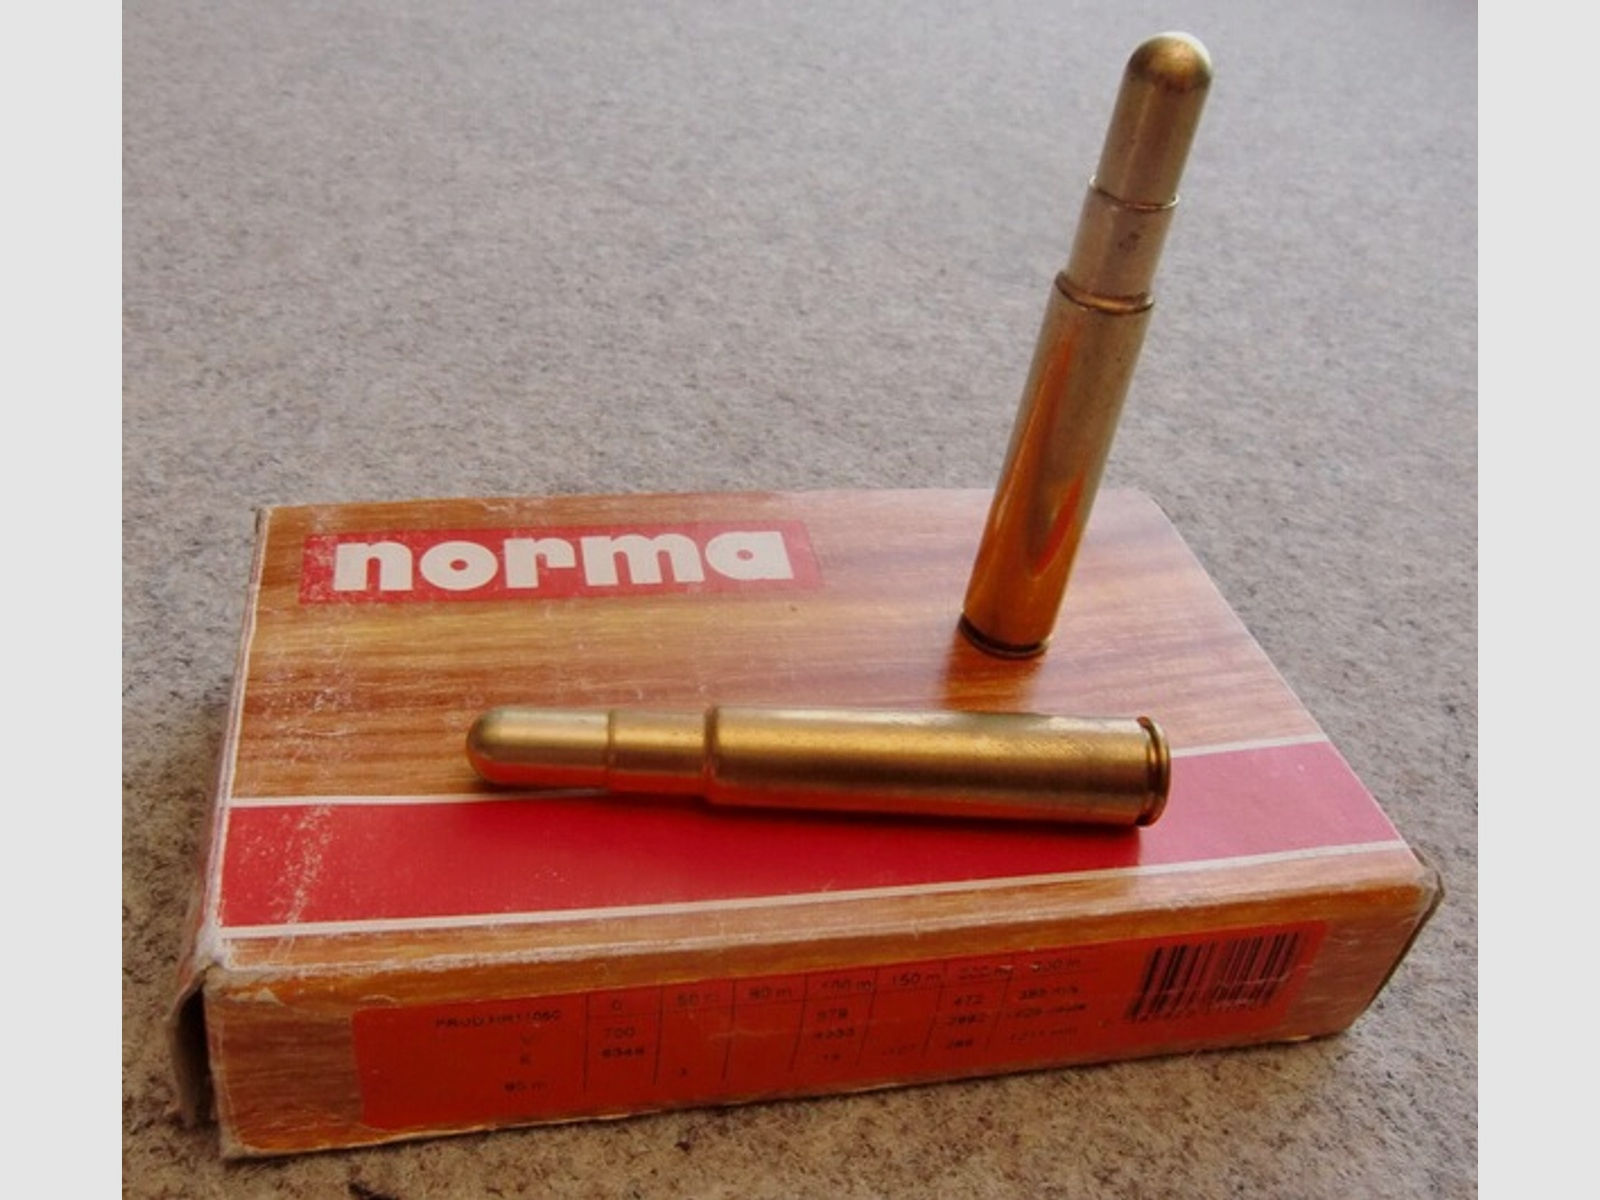 MUNITION: 20 PATRONEN, NORMA, KAL. .416 RIGBY, AB LAGER LIEFERBAR!!!